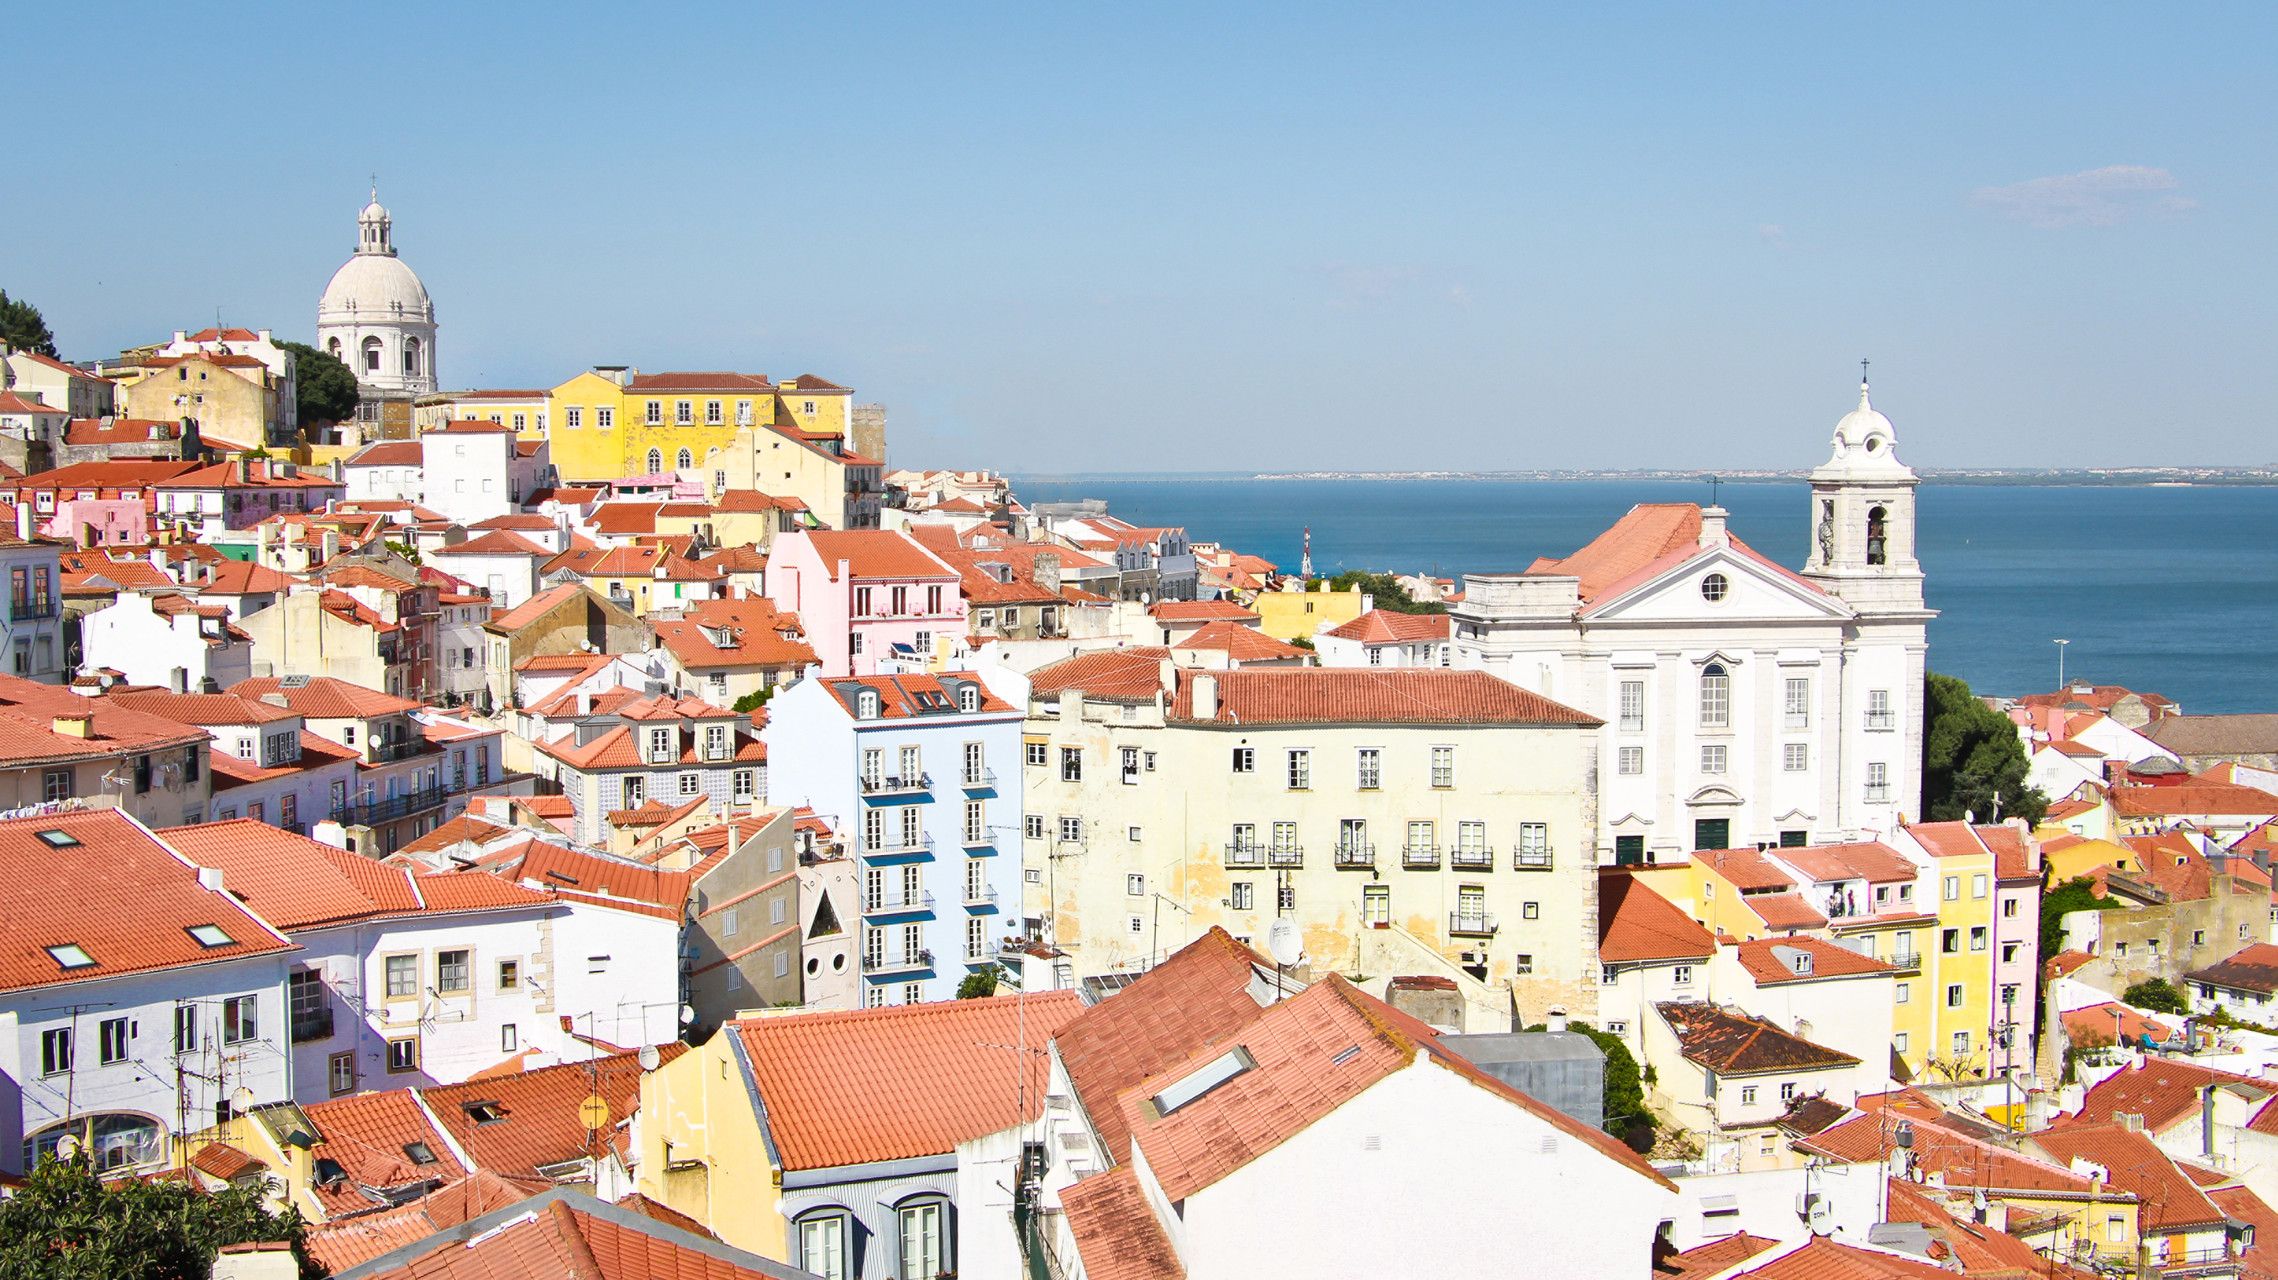 Lisbon with children: a guide - Moving to Portugal